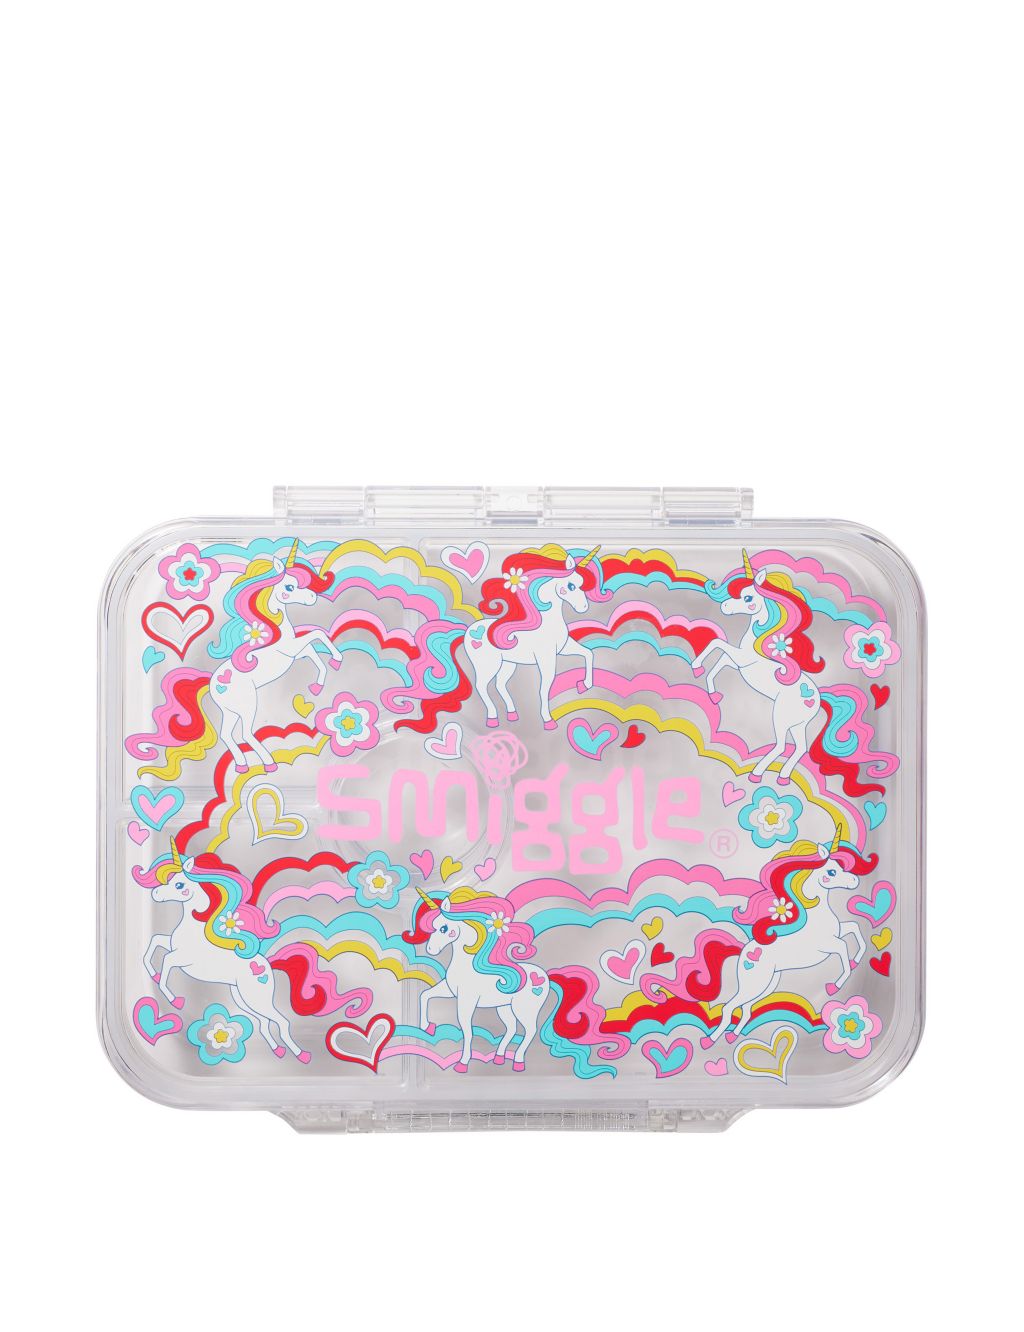 Kids' Patterned Lunch Box image 1